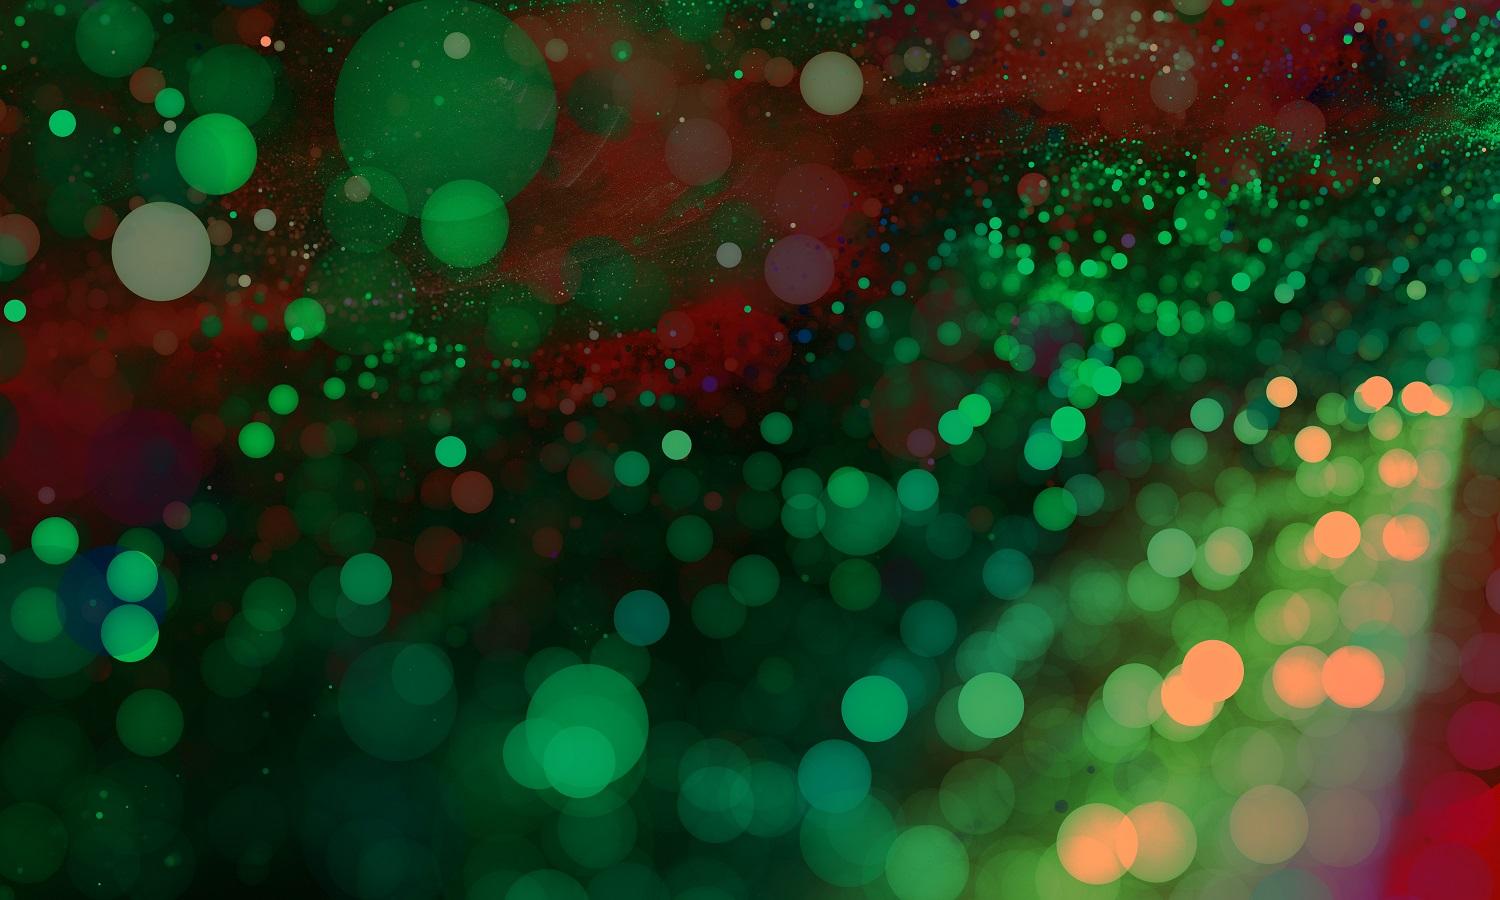 Green and Red Abstract art droplets of paint and glitter